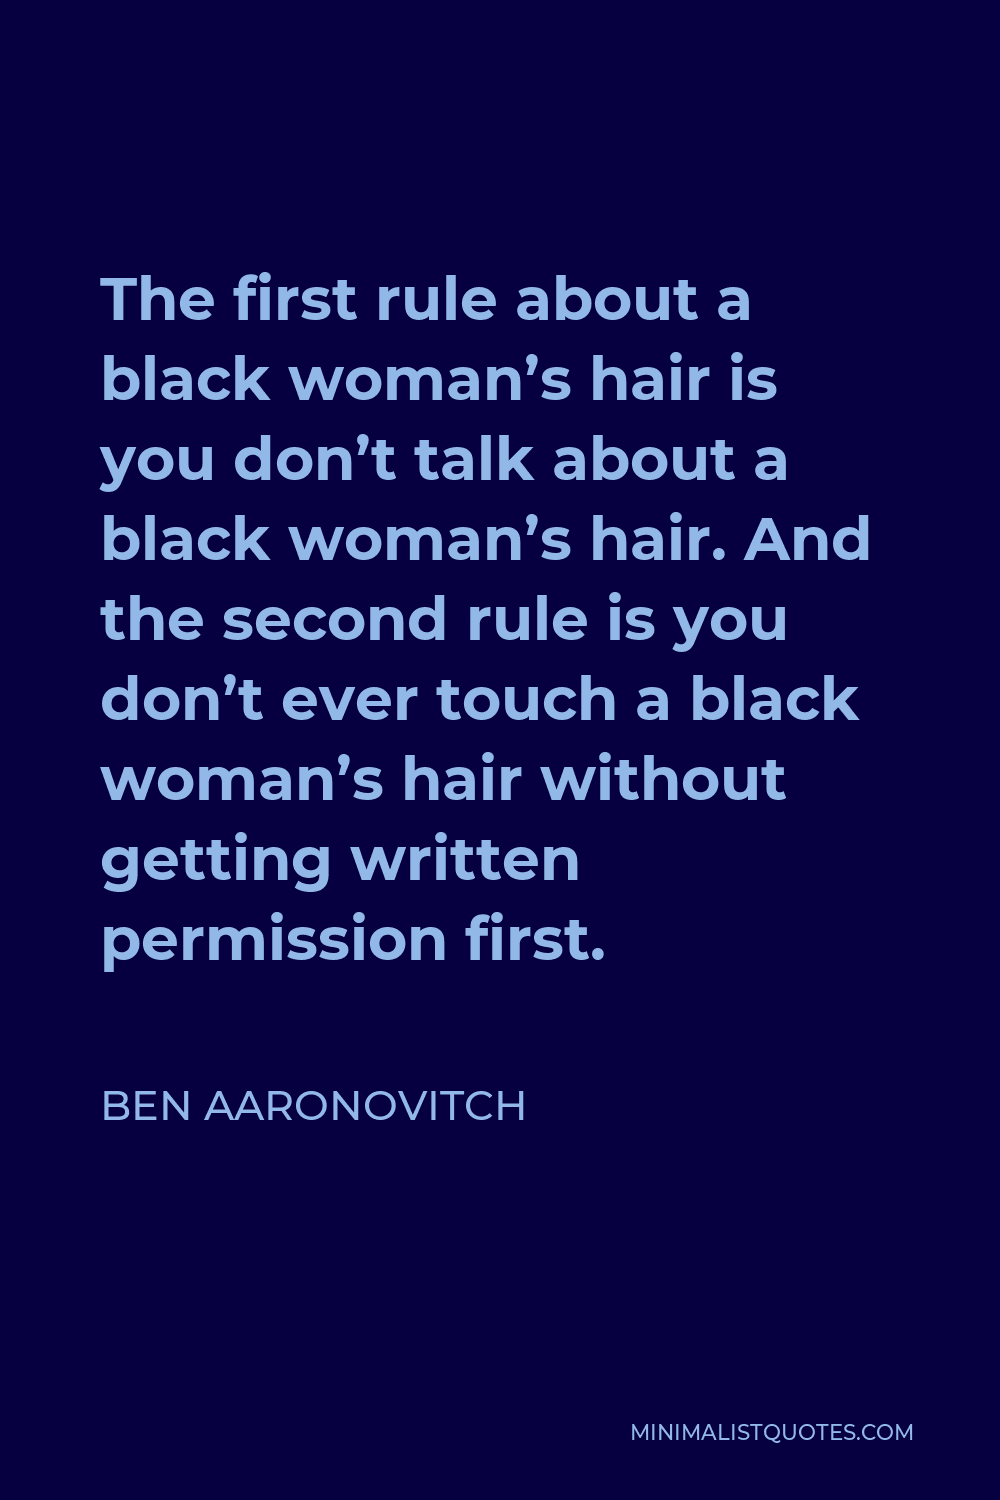 Ben Aaronovitch Quote - The first rule about a black woman’s hair is you don’t talk about a black woman’s hair. And the second rule is you don’t ever touch a black woman’s hair without getting written permission first.